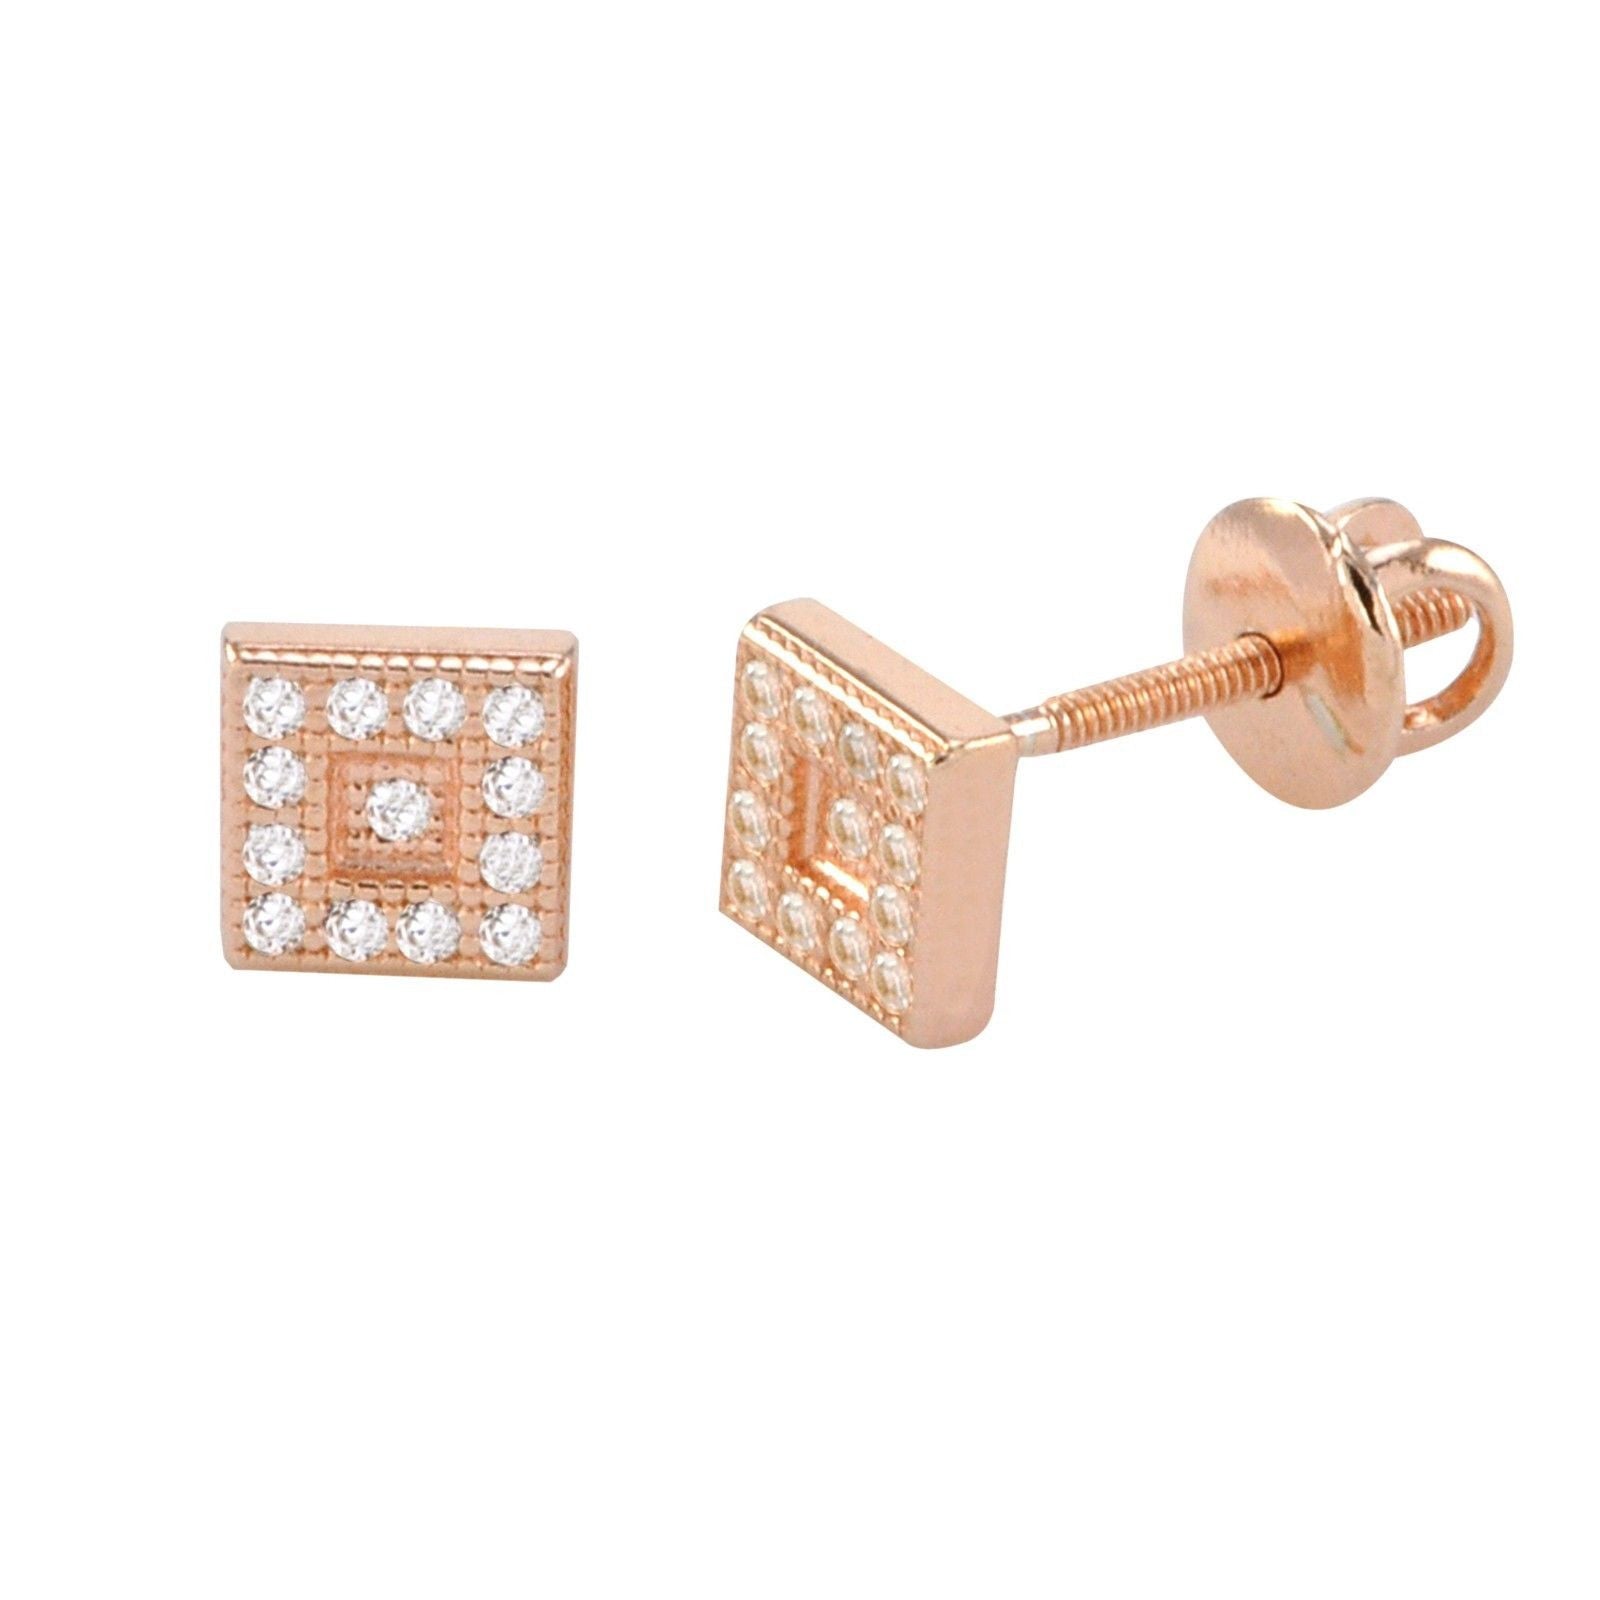 Screwback Stud Earrings Sterling Silver Rose Gold 5mm CZ Square Center ...